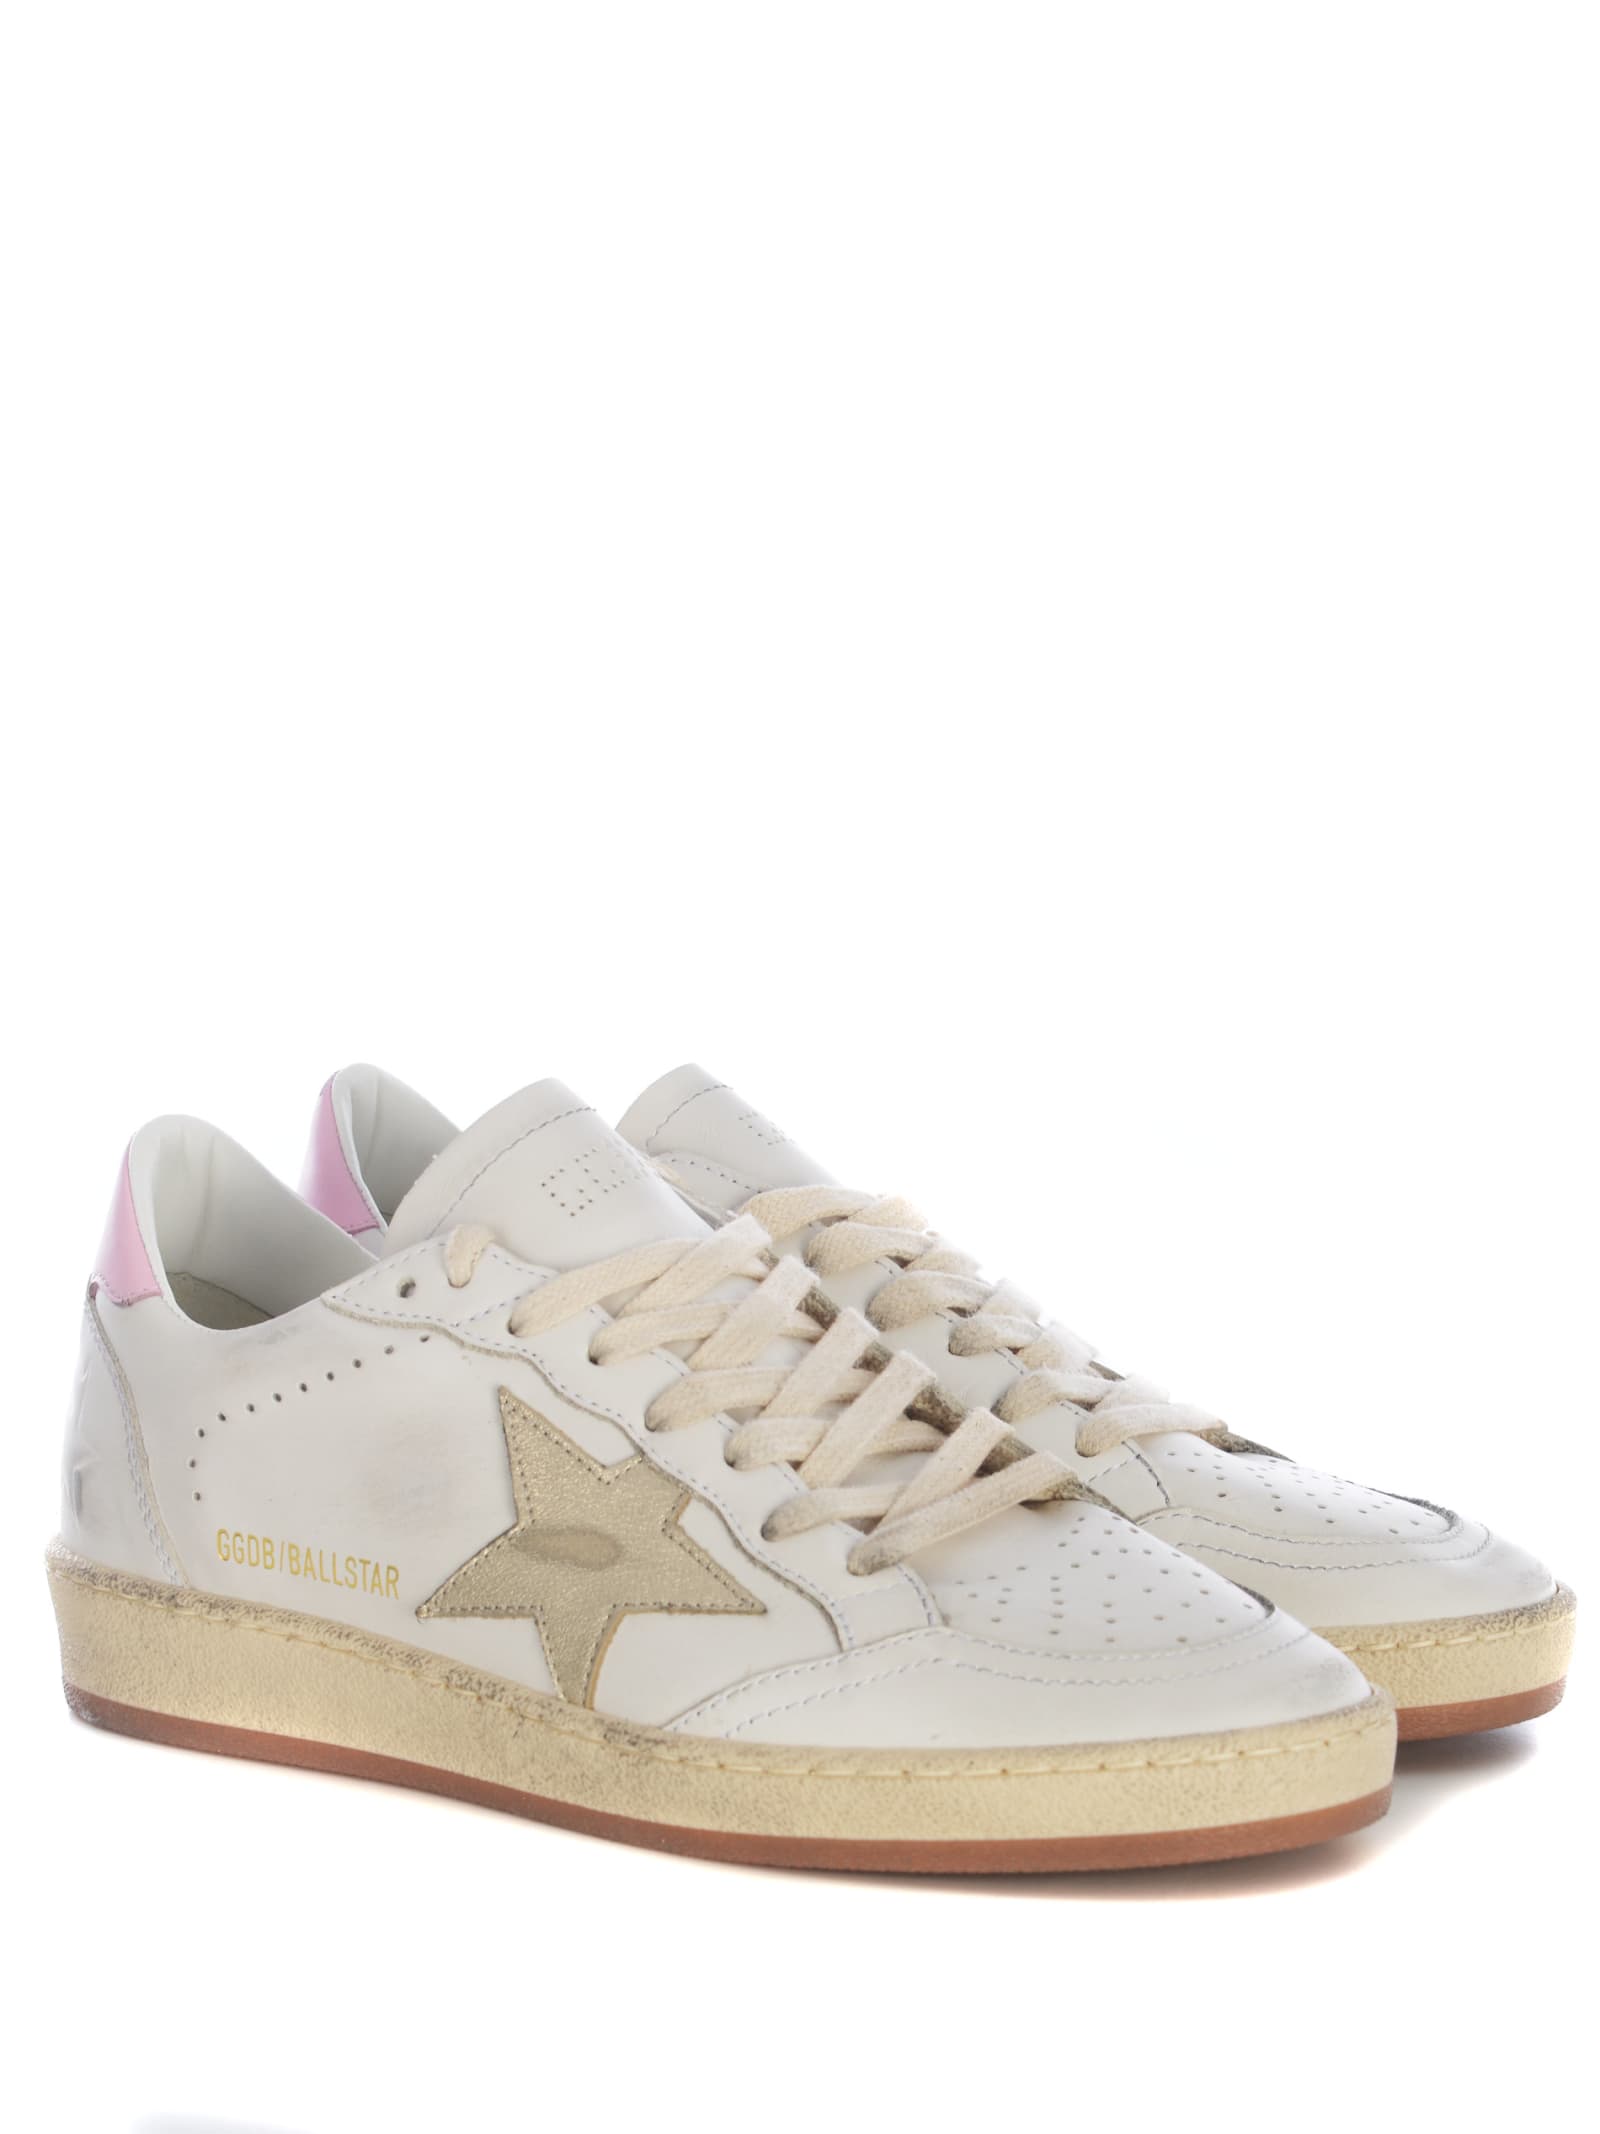 Shop Golden Goose Sneakers  Ball Star Made Of Leather In Bianco